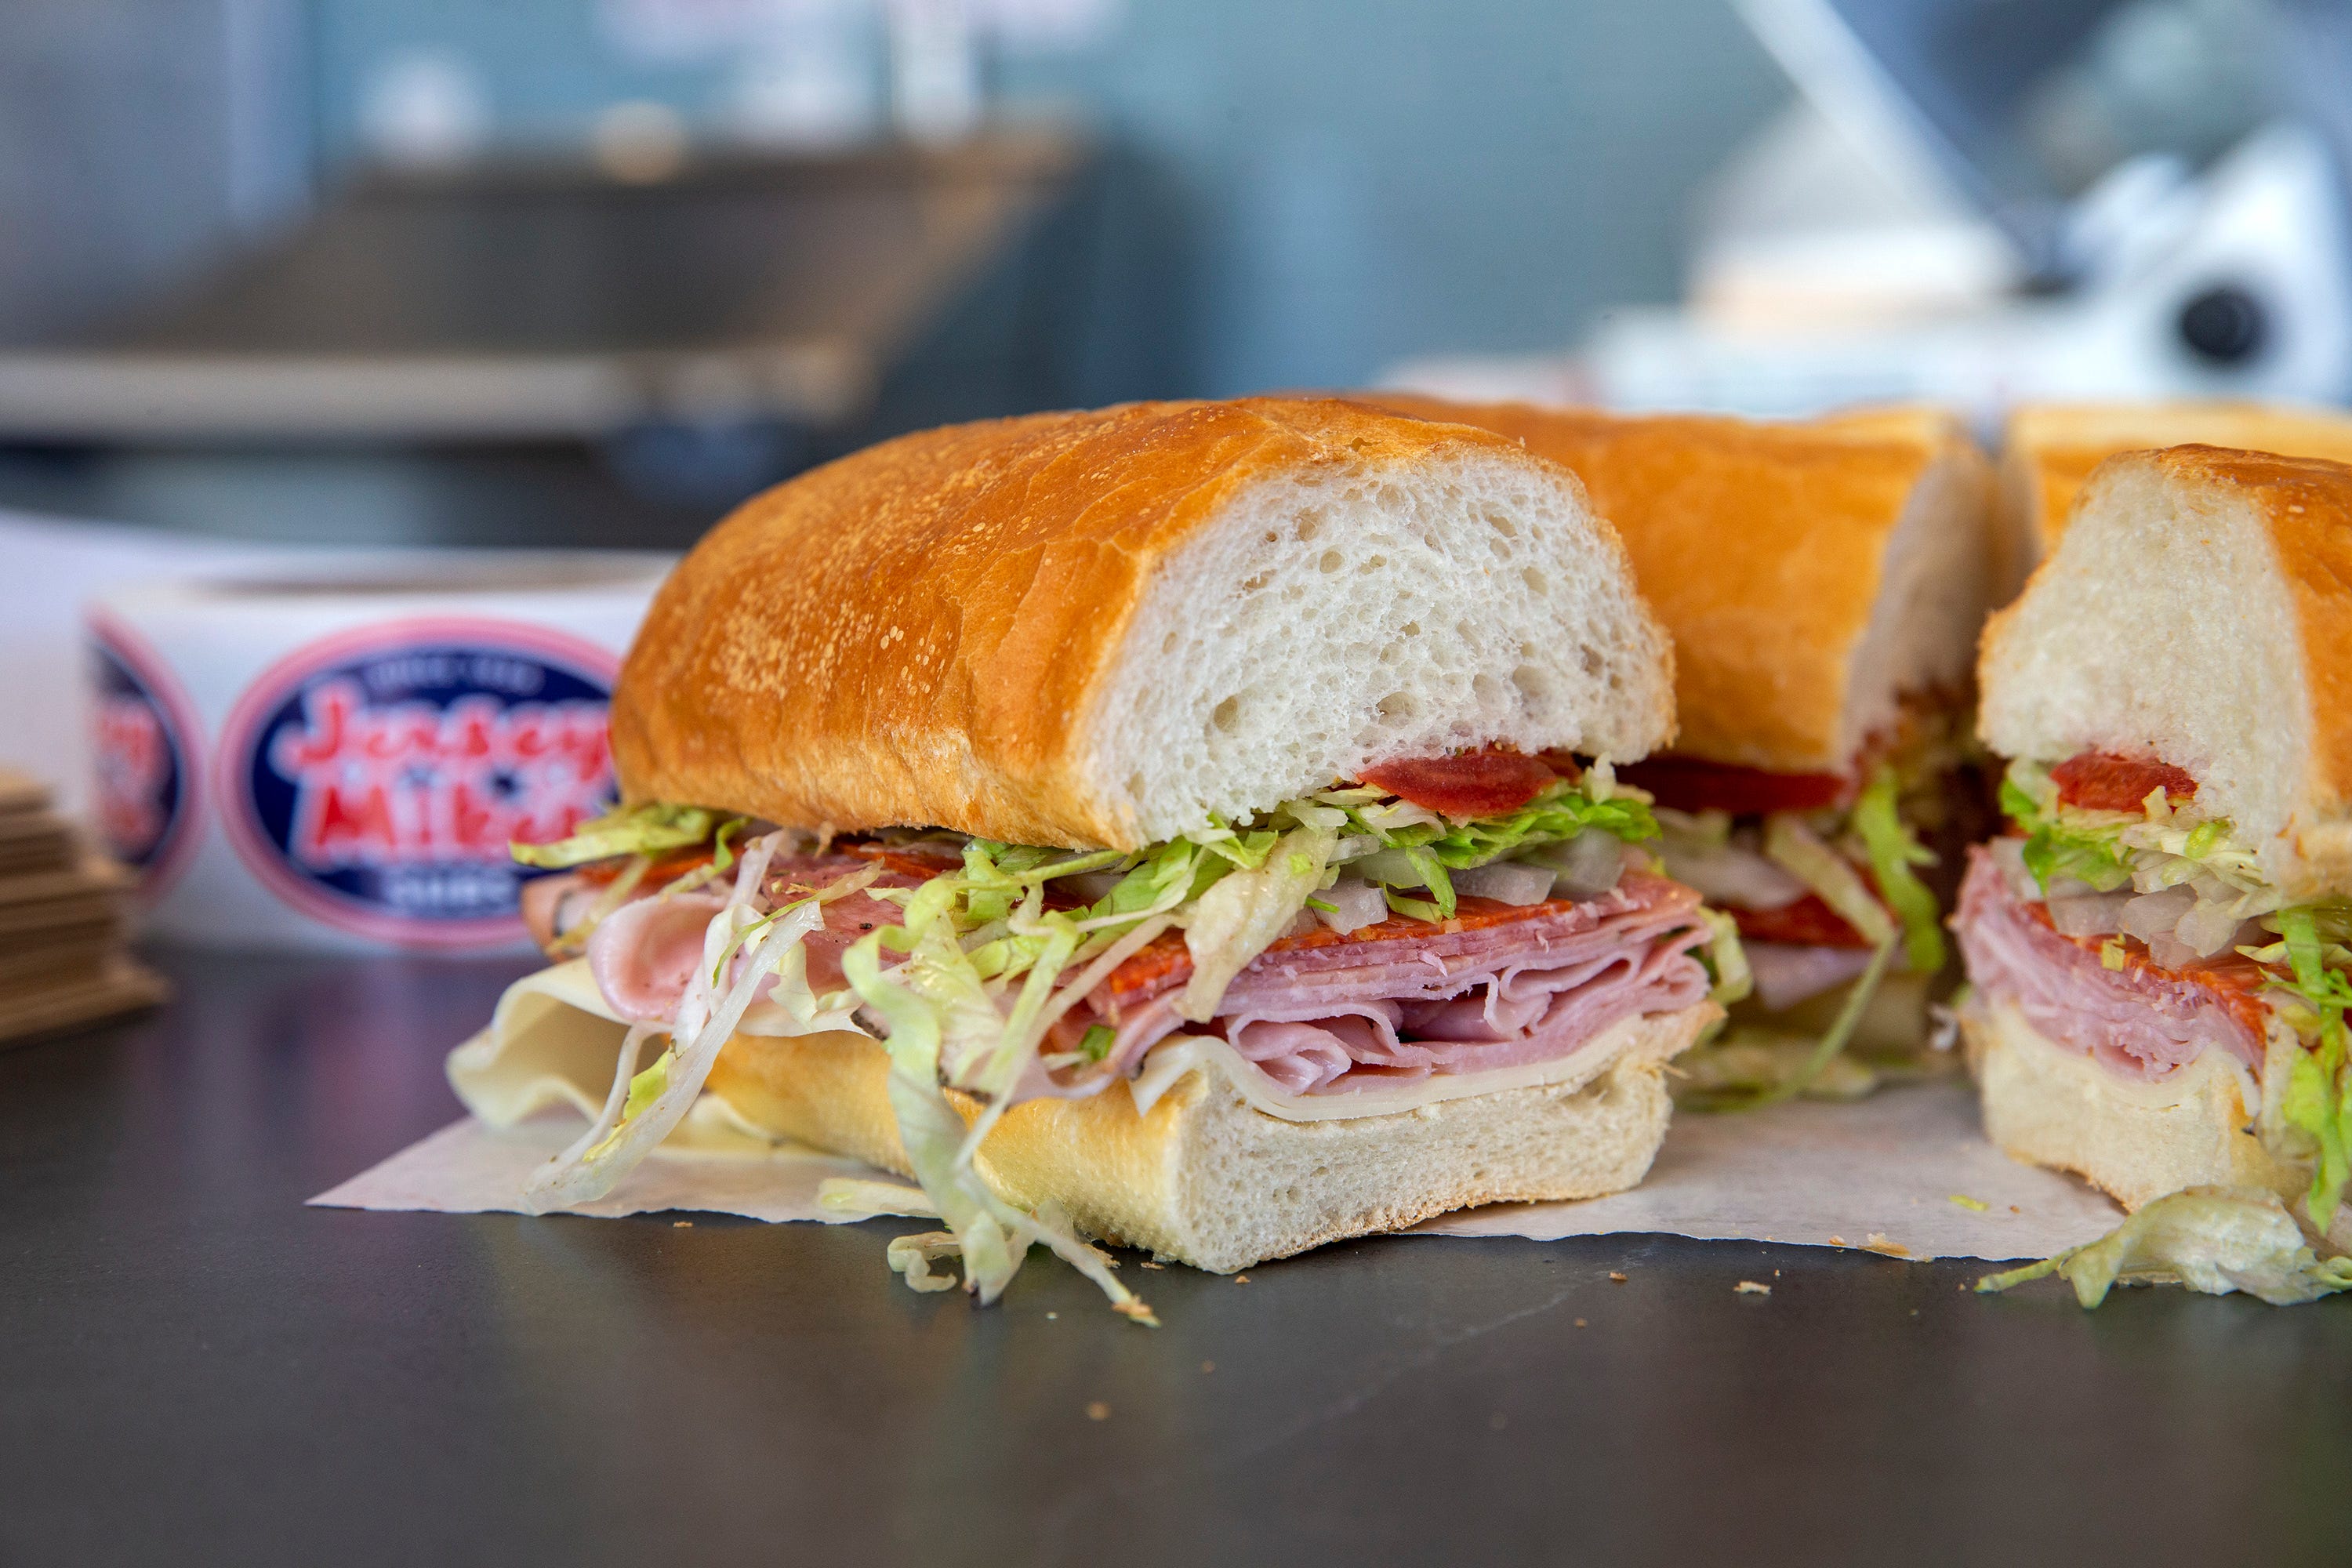 jersey mike's locations san diego